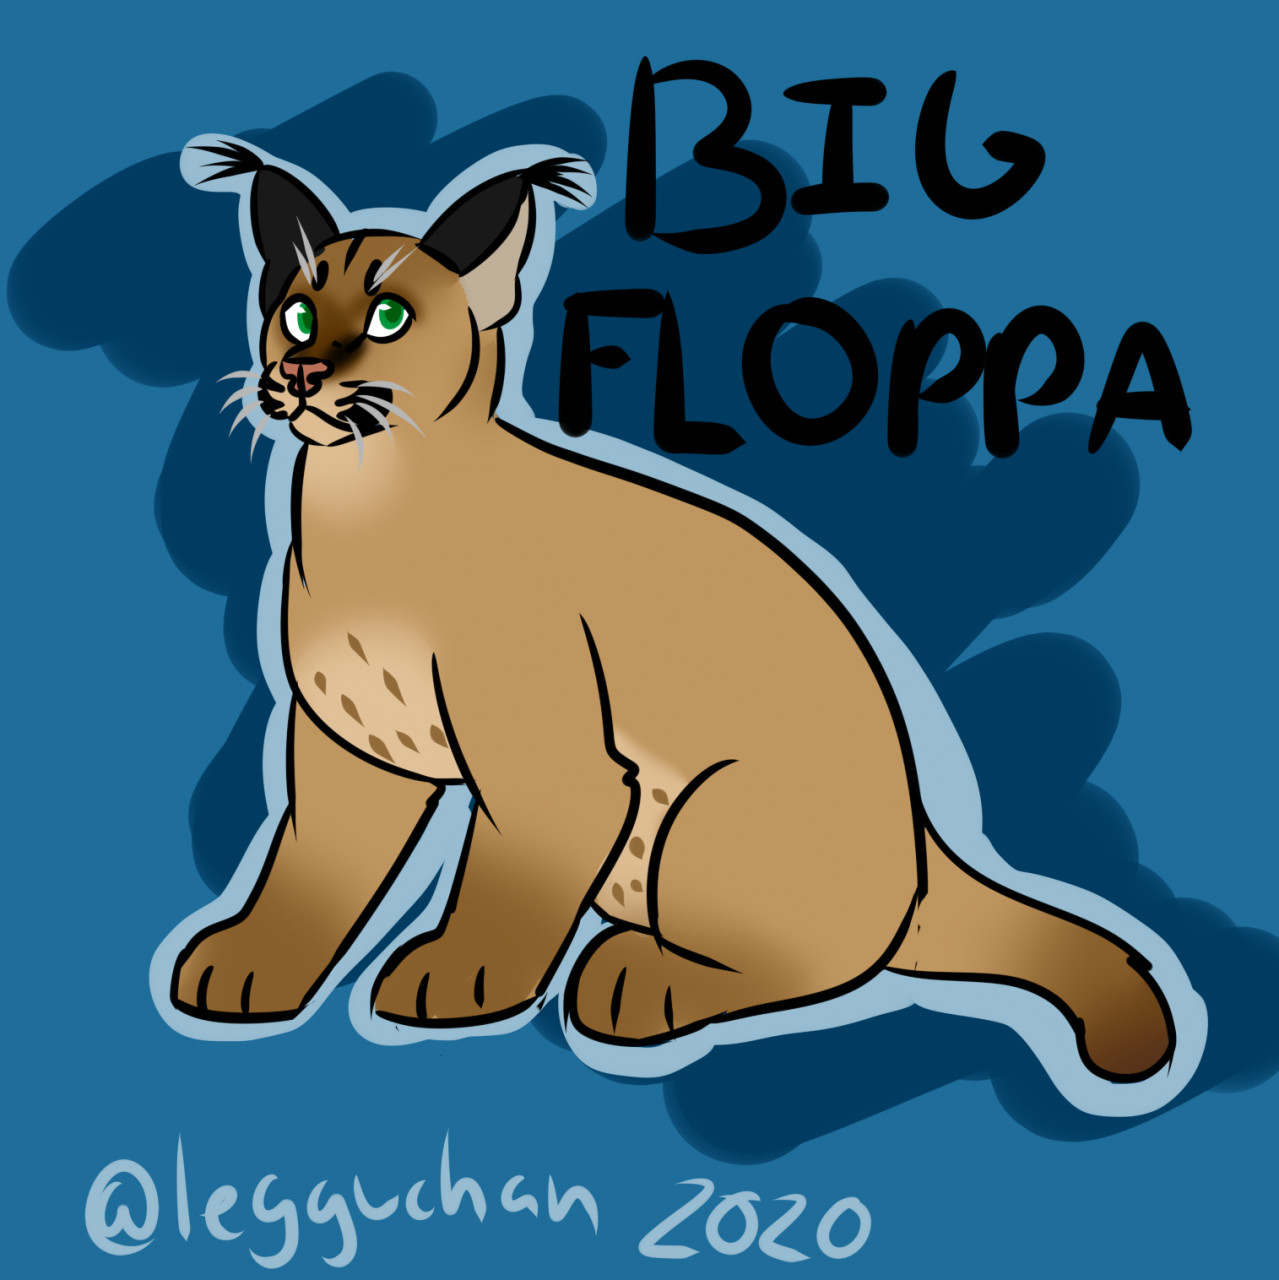 Have You Seen This Cat, Big Floppa